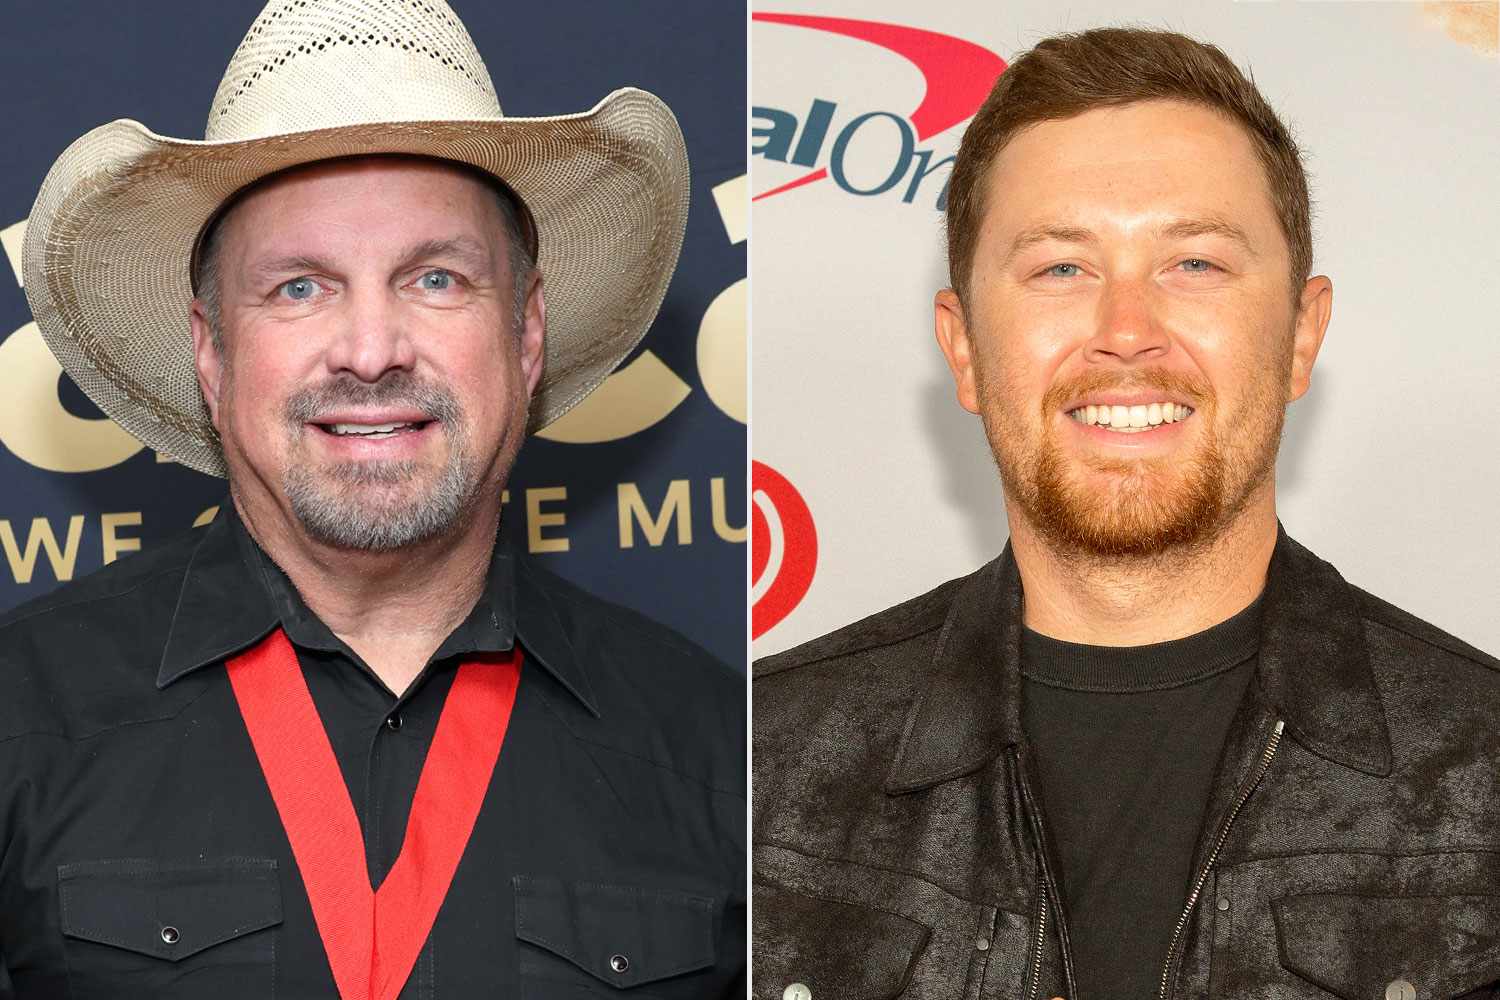 Scotty McCreery Reflects on Friendship with 'Influence' Garth Brooks: 'I'll Always Be Indebted to Him'